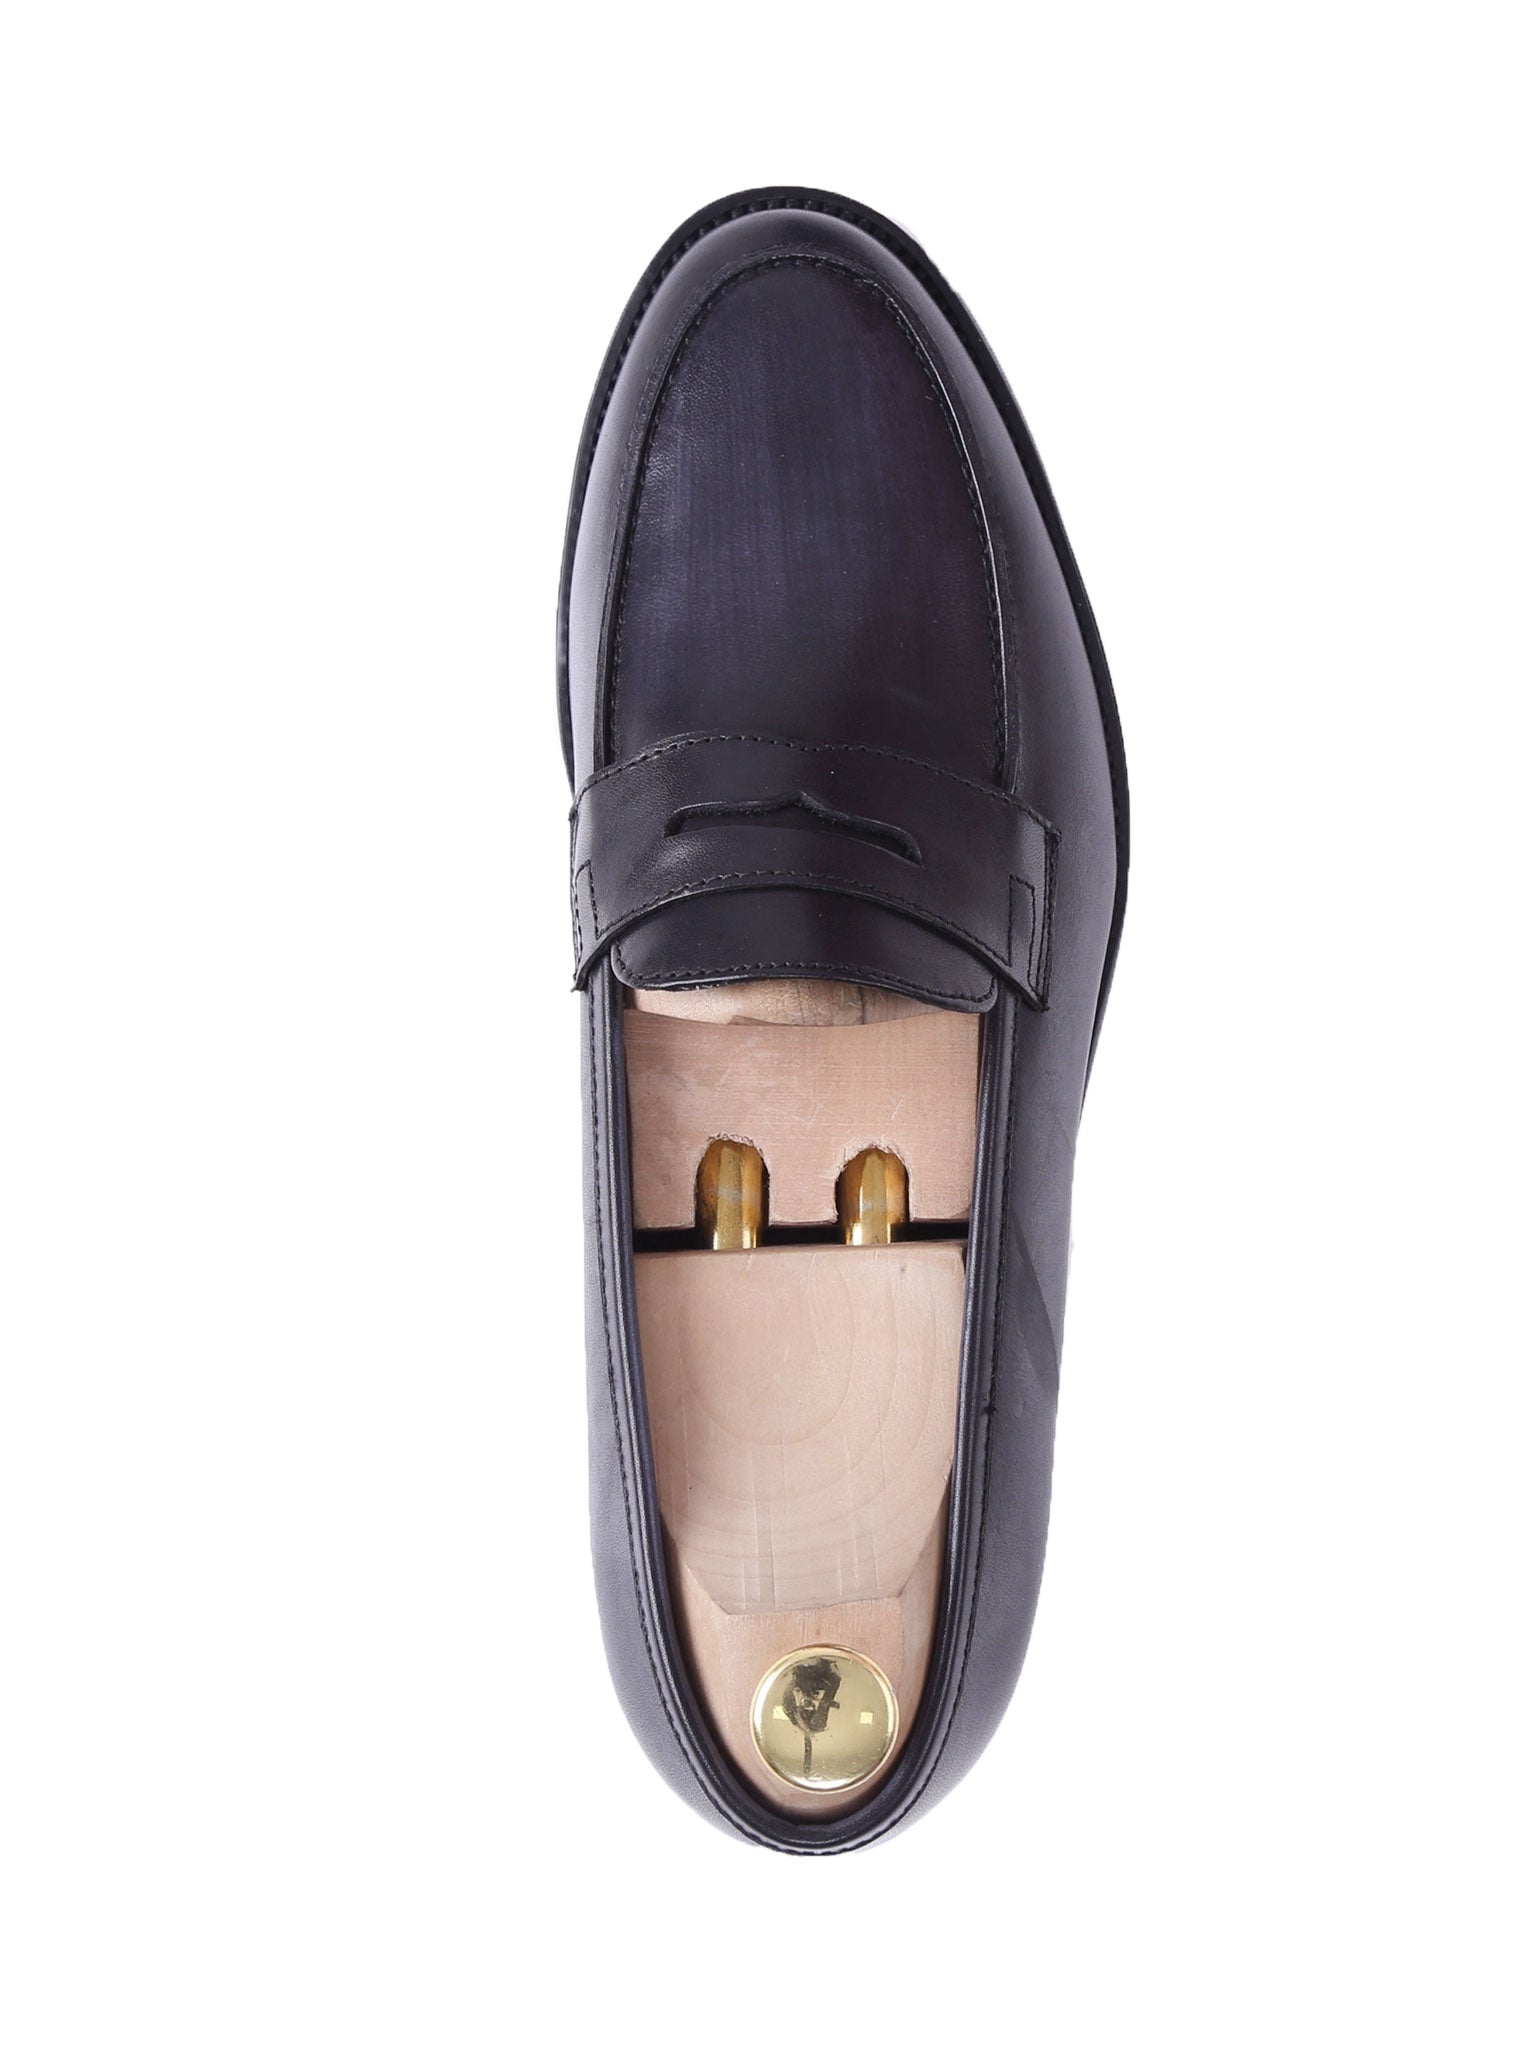 Penny Loafer - Black Grey (Hand Painted Patina) - Zeve Shoes